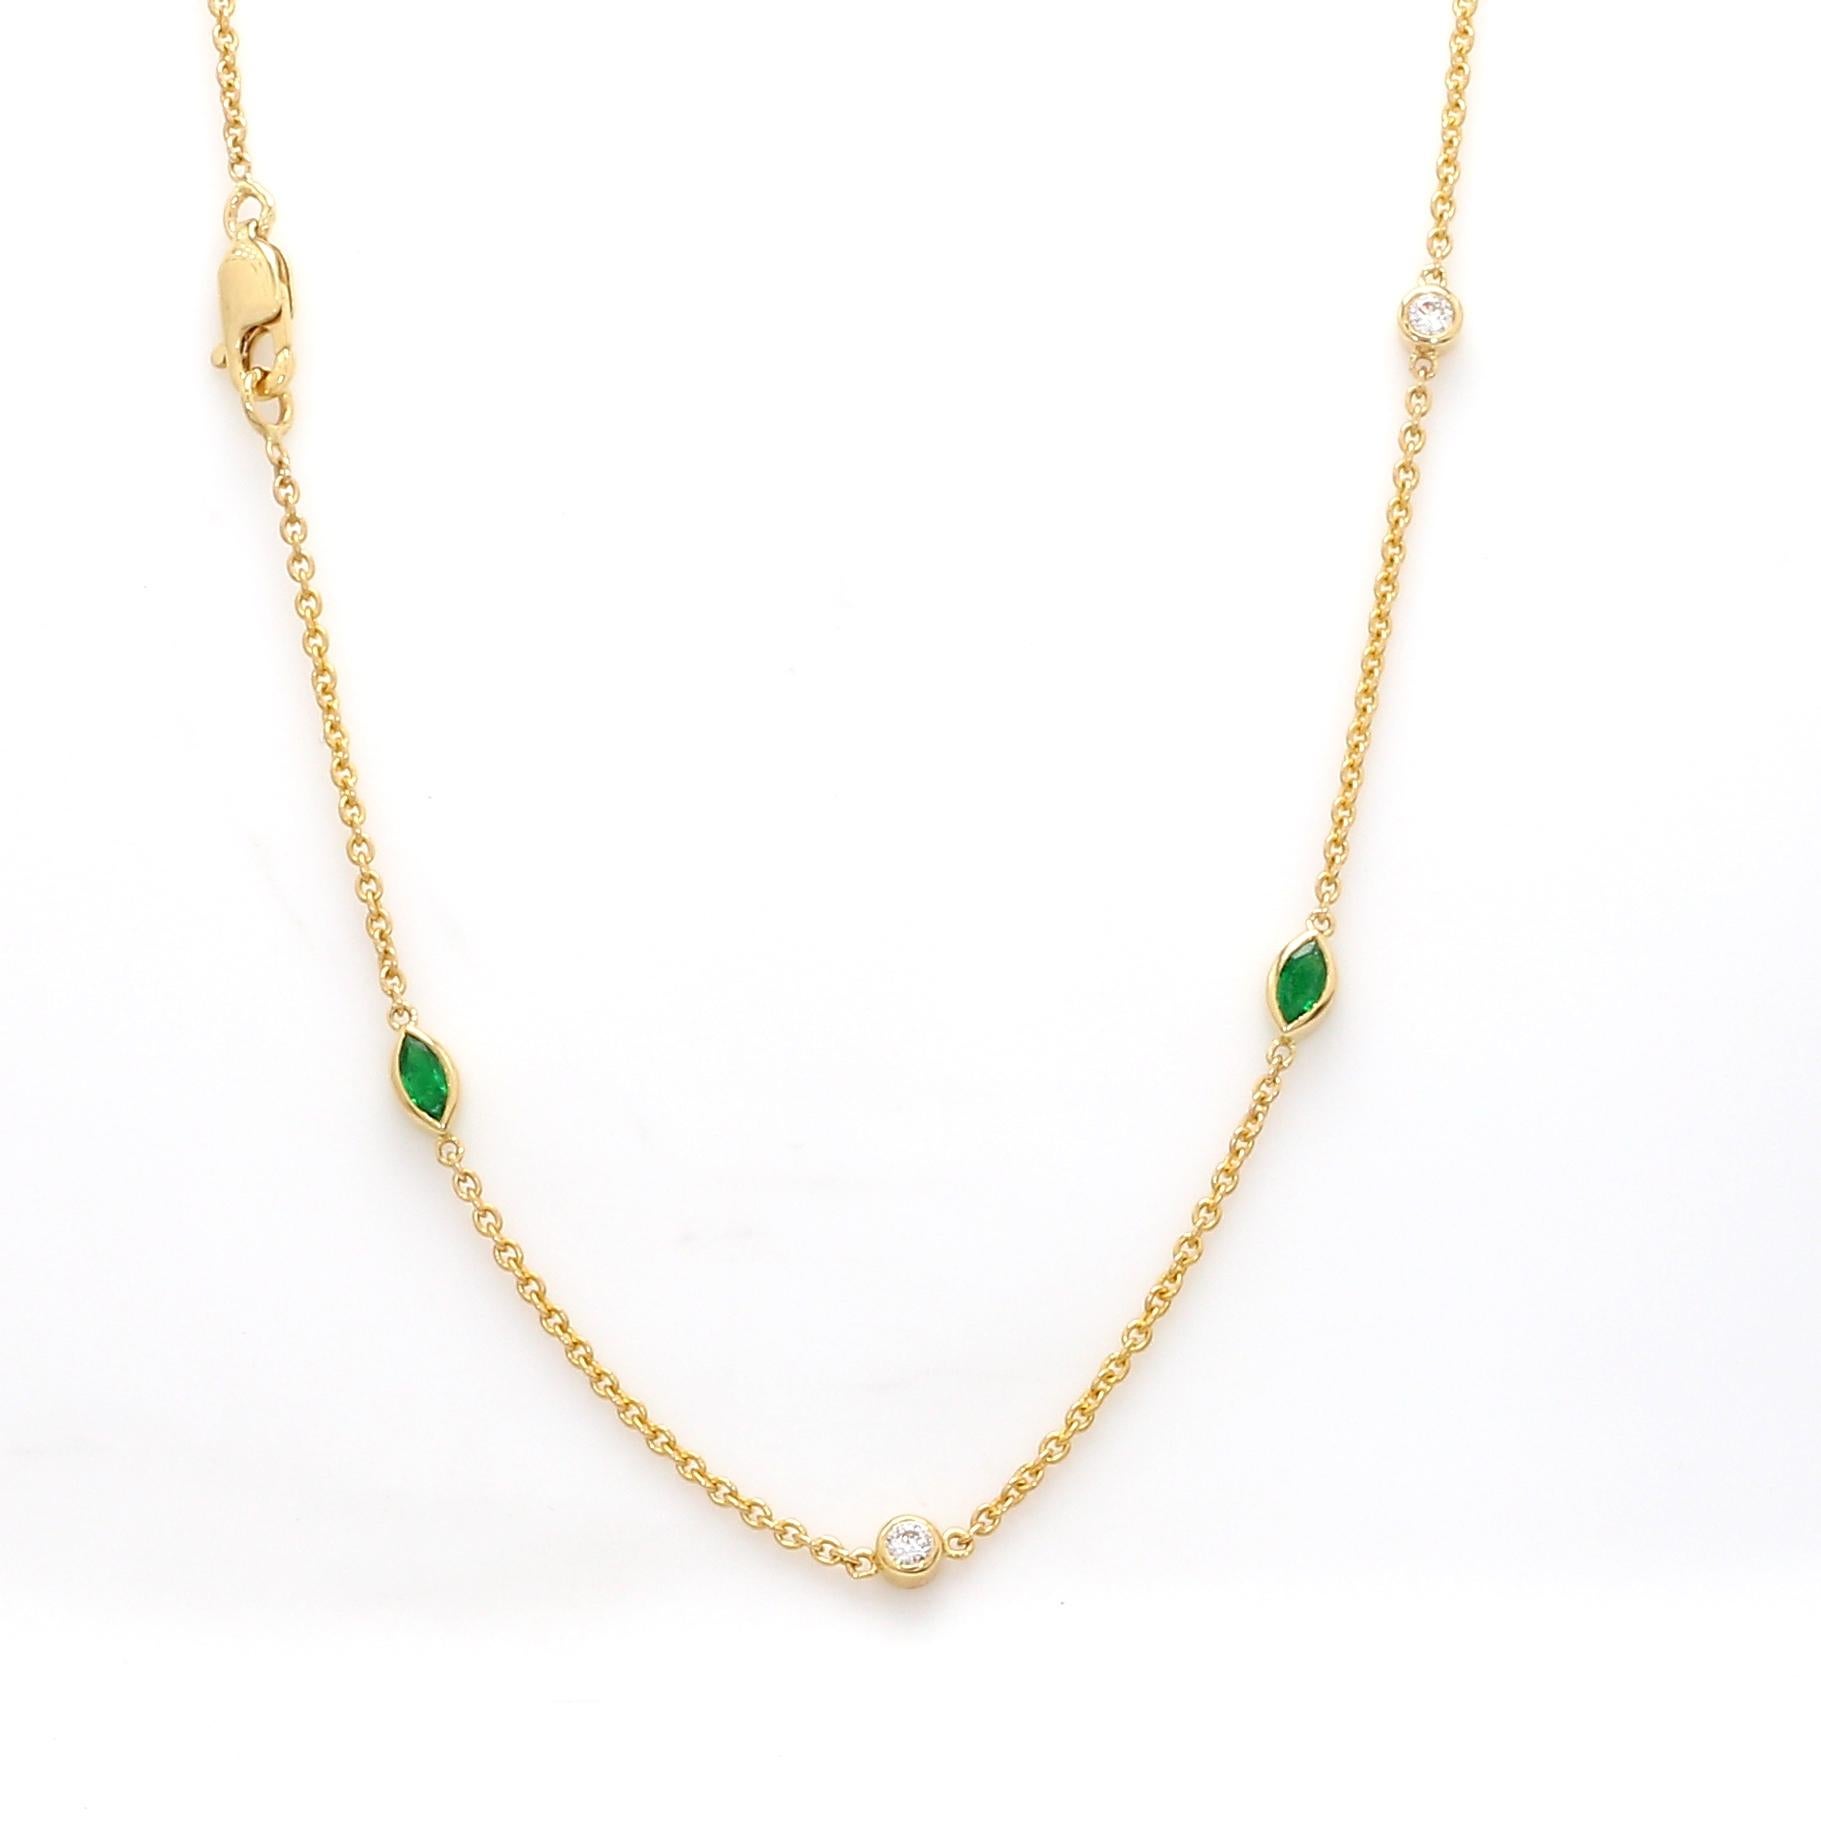 A Beautiful Handcrafted Necklace in 18 Karat Yellow Gold  with Natural Emerald in Marquise Shape and Round Diamonds on nice cable chain.

Emerald Details
Pieces : 8 Pieces Marquise Cut 
Weight : 0.96 Carat 
AAA Quality Emerald

Natural Diamond